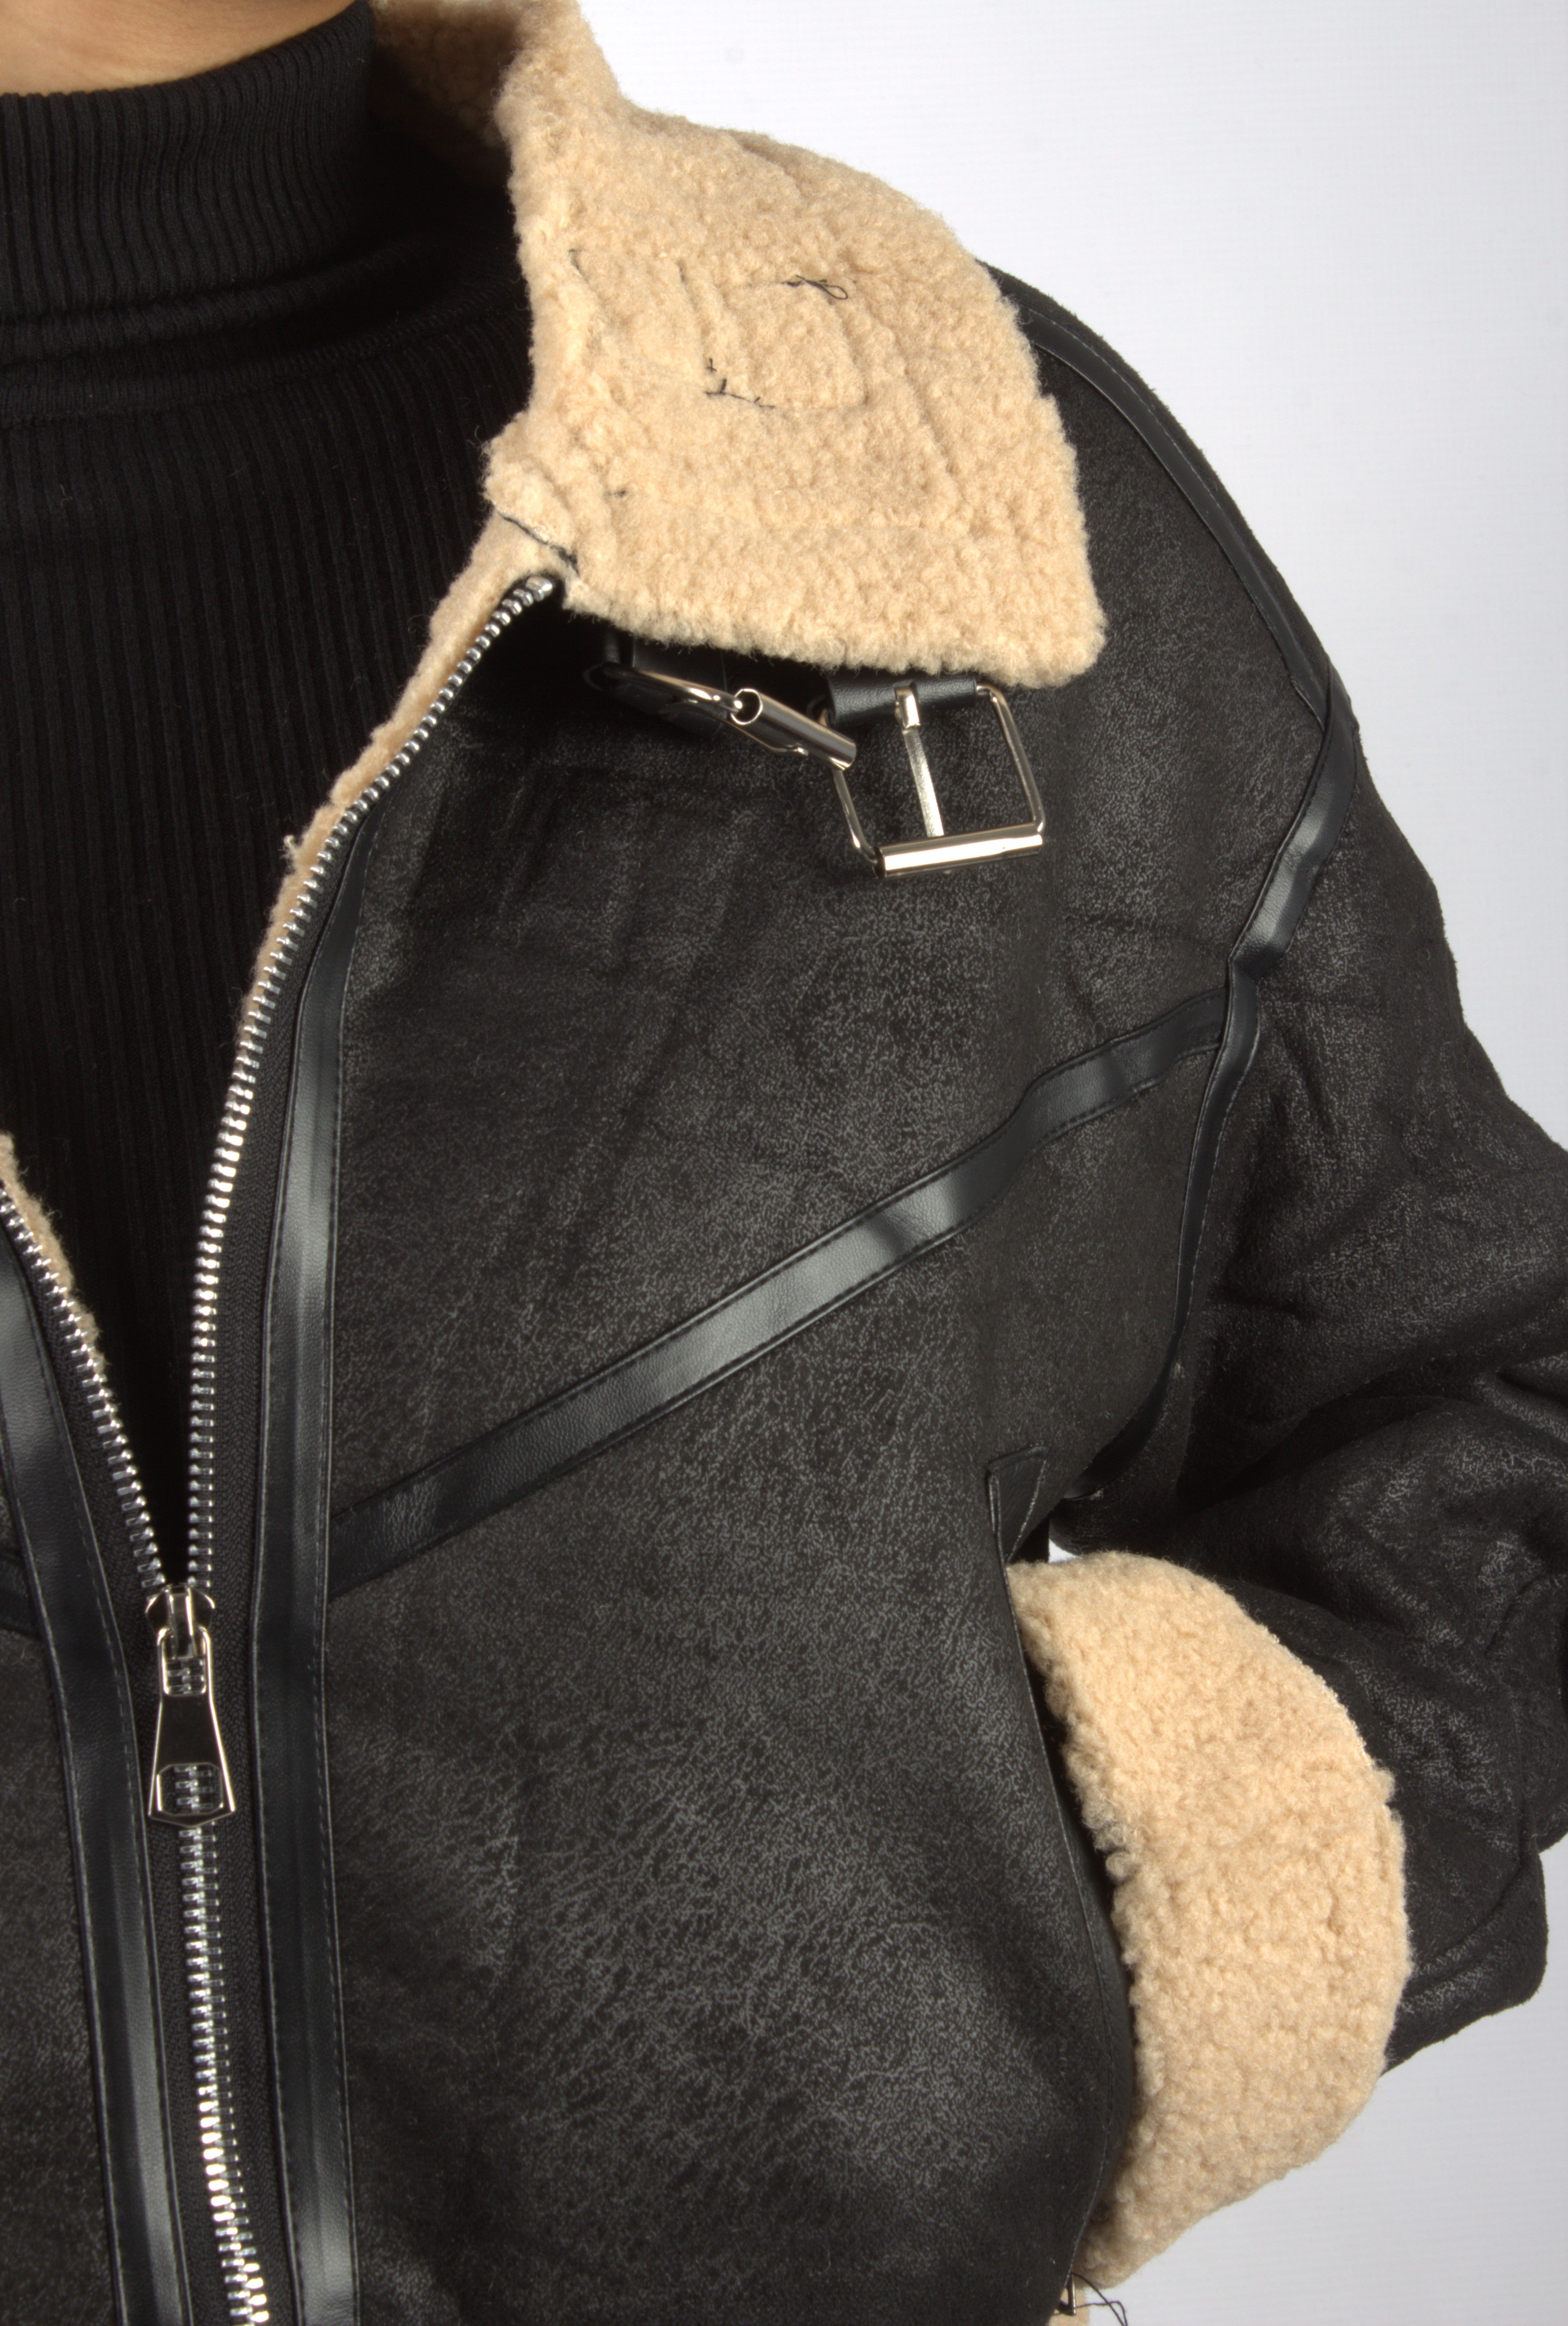 Teddy Lined Zip Up PU Leather Jacket